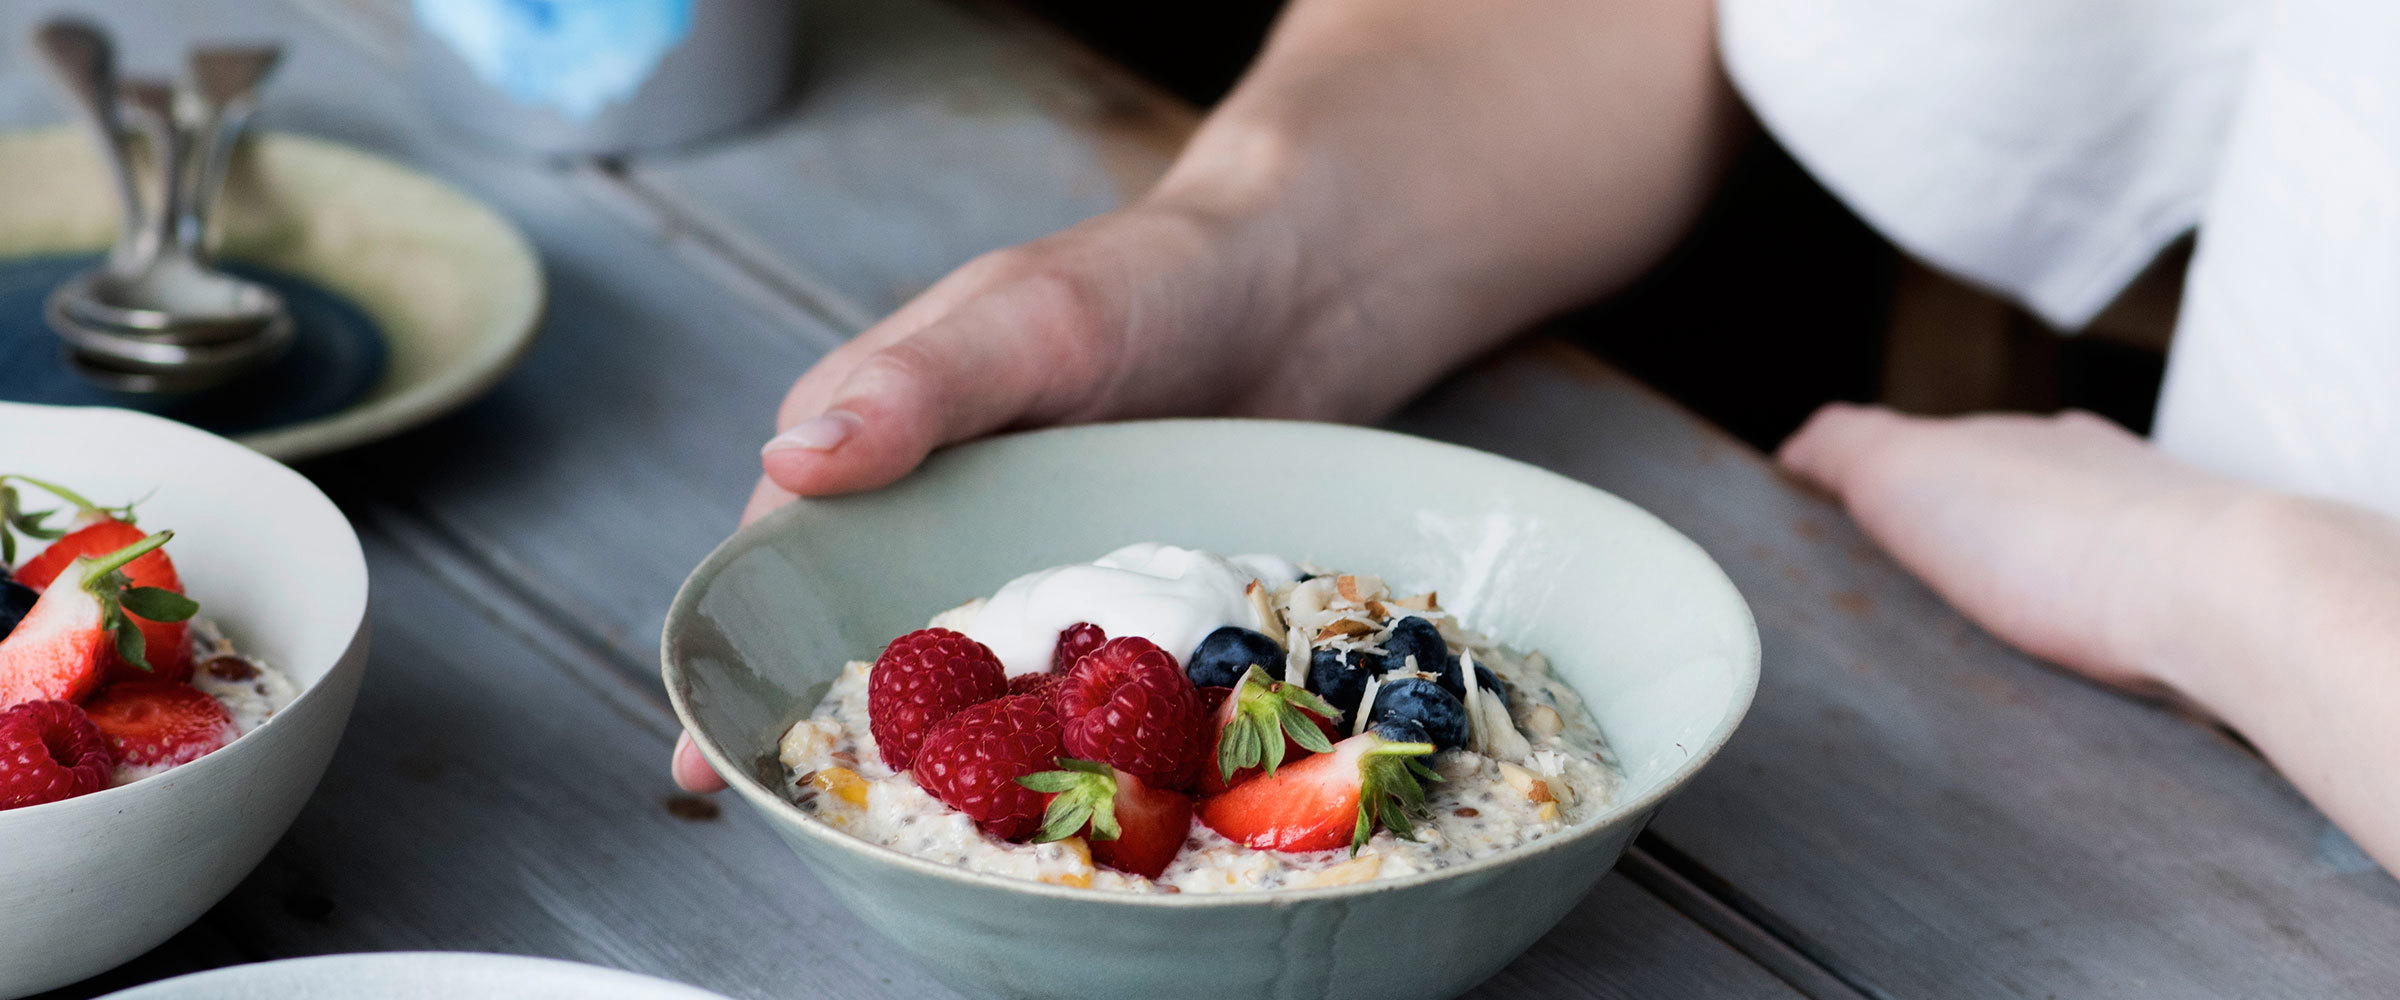 A bowl of bircher muesli topped with berries and yogurt on a table in front of a diners hand